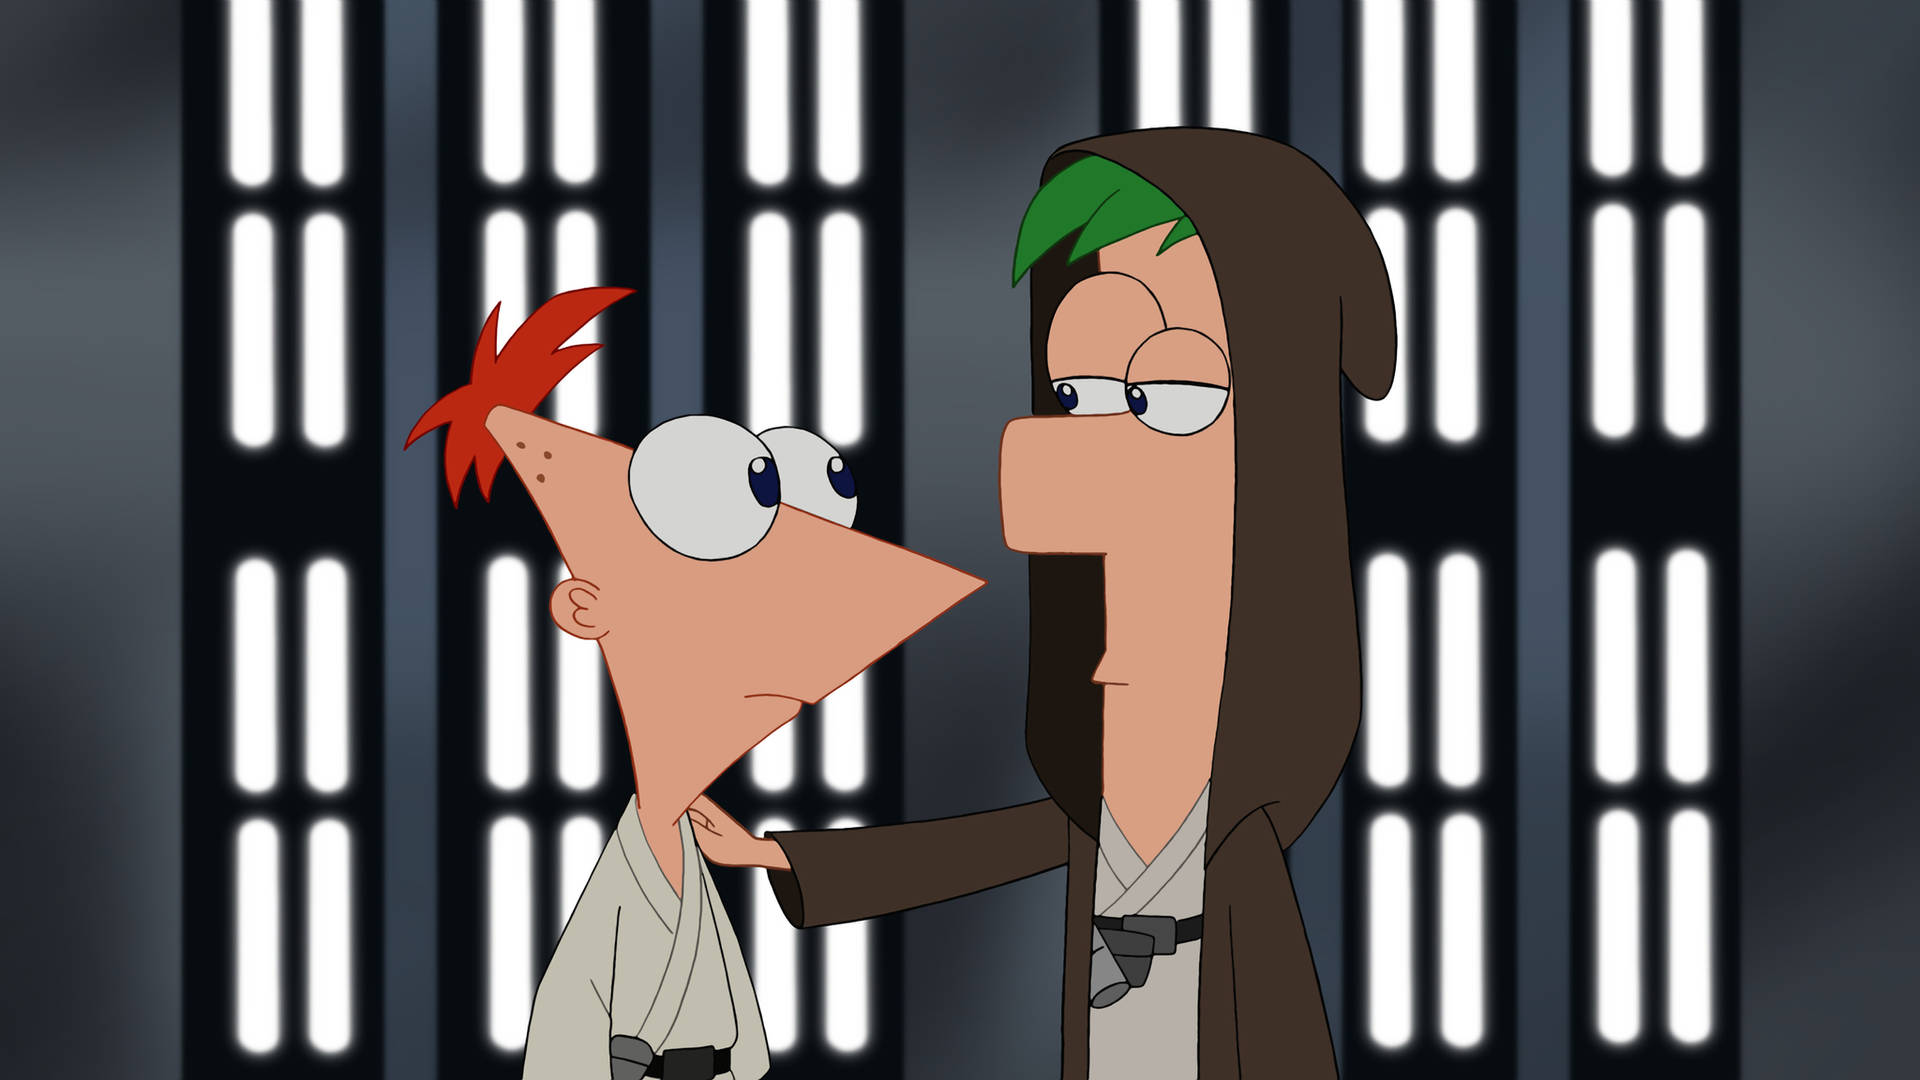 Phineas And Ferb Star Wars Crossover Background